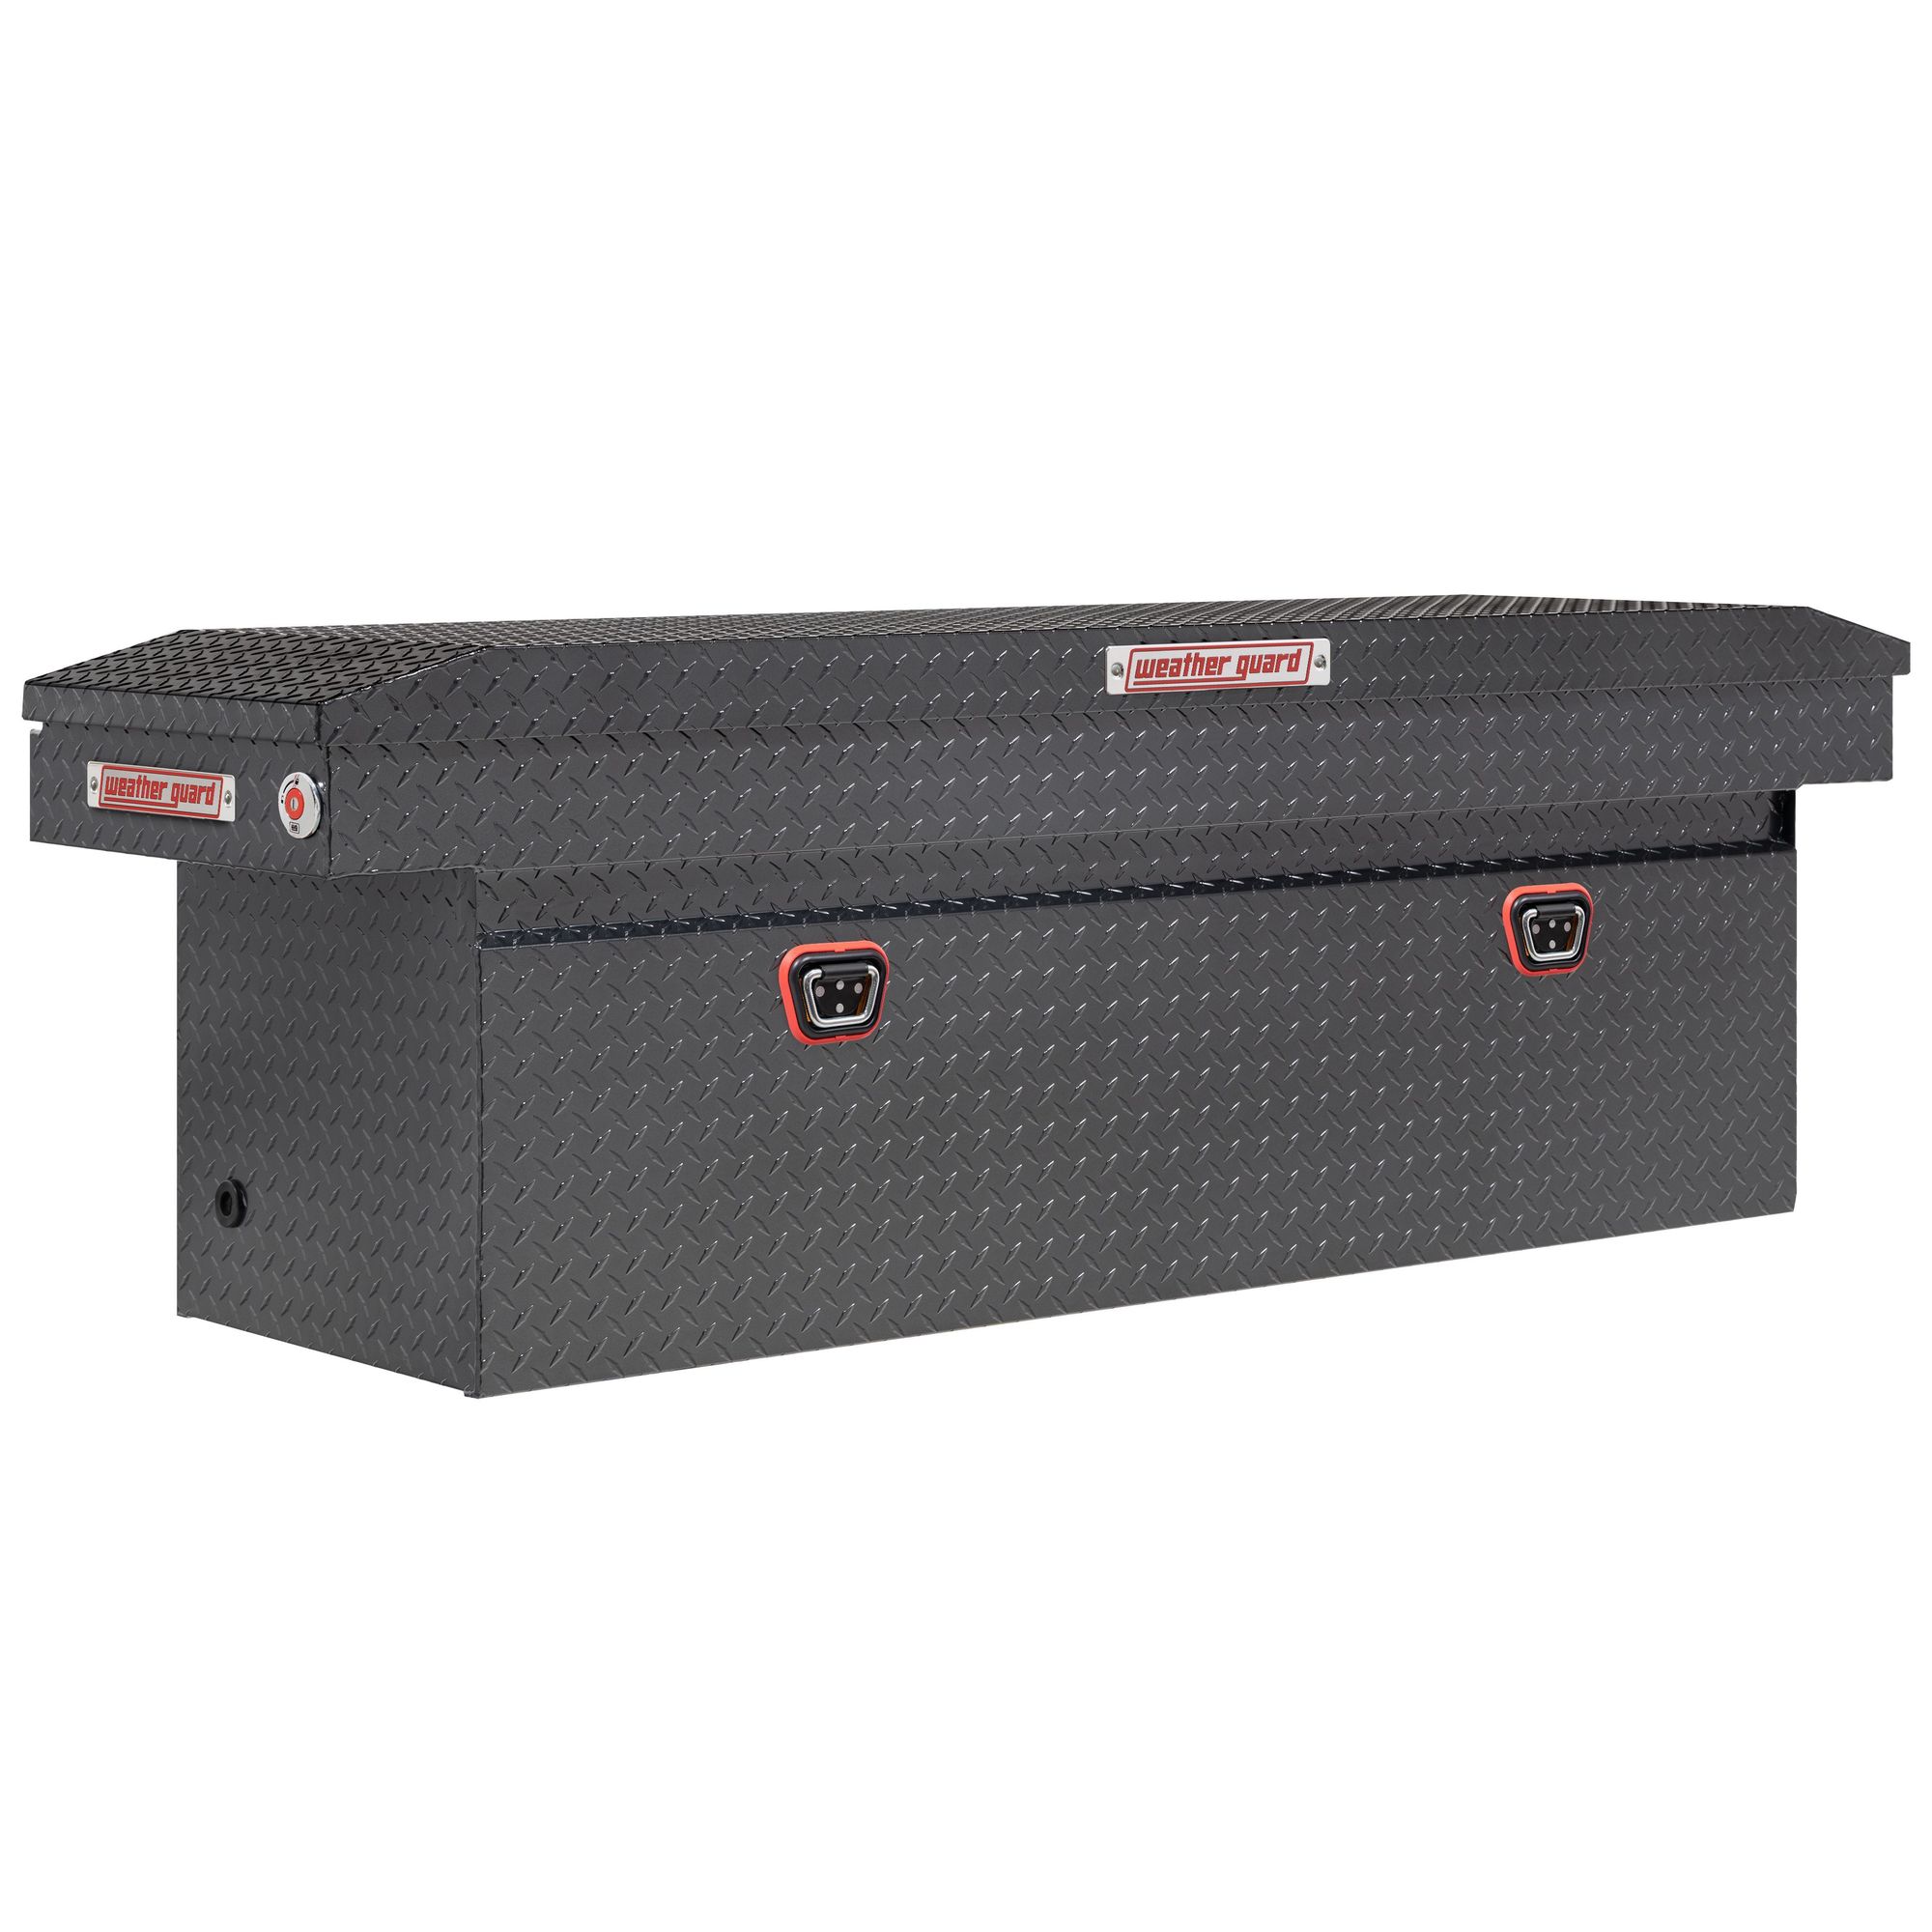 Weather Guard, 71Inch L Saddle Box, Full Deep, Width 72 in, Material Aluminum, Color Finish Gray, Model 123-6-04